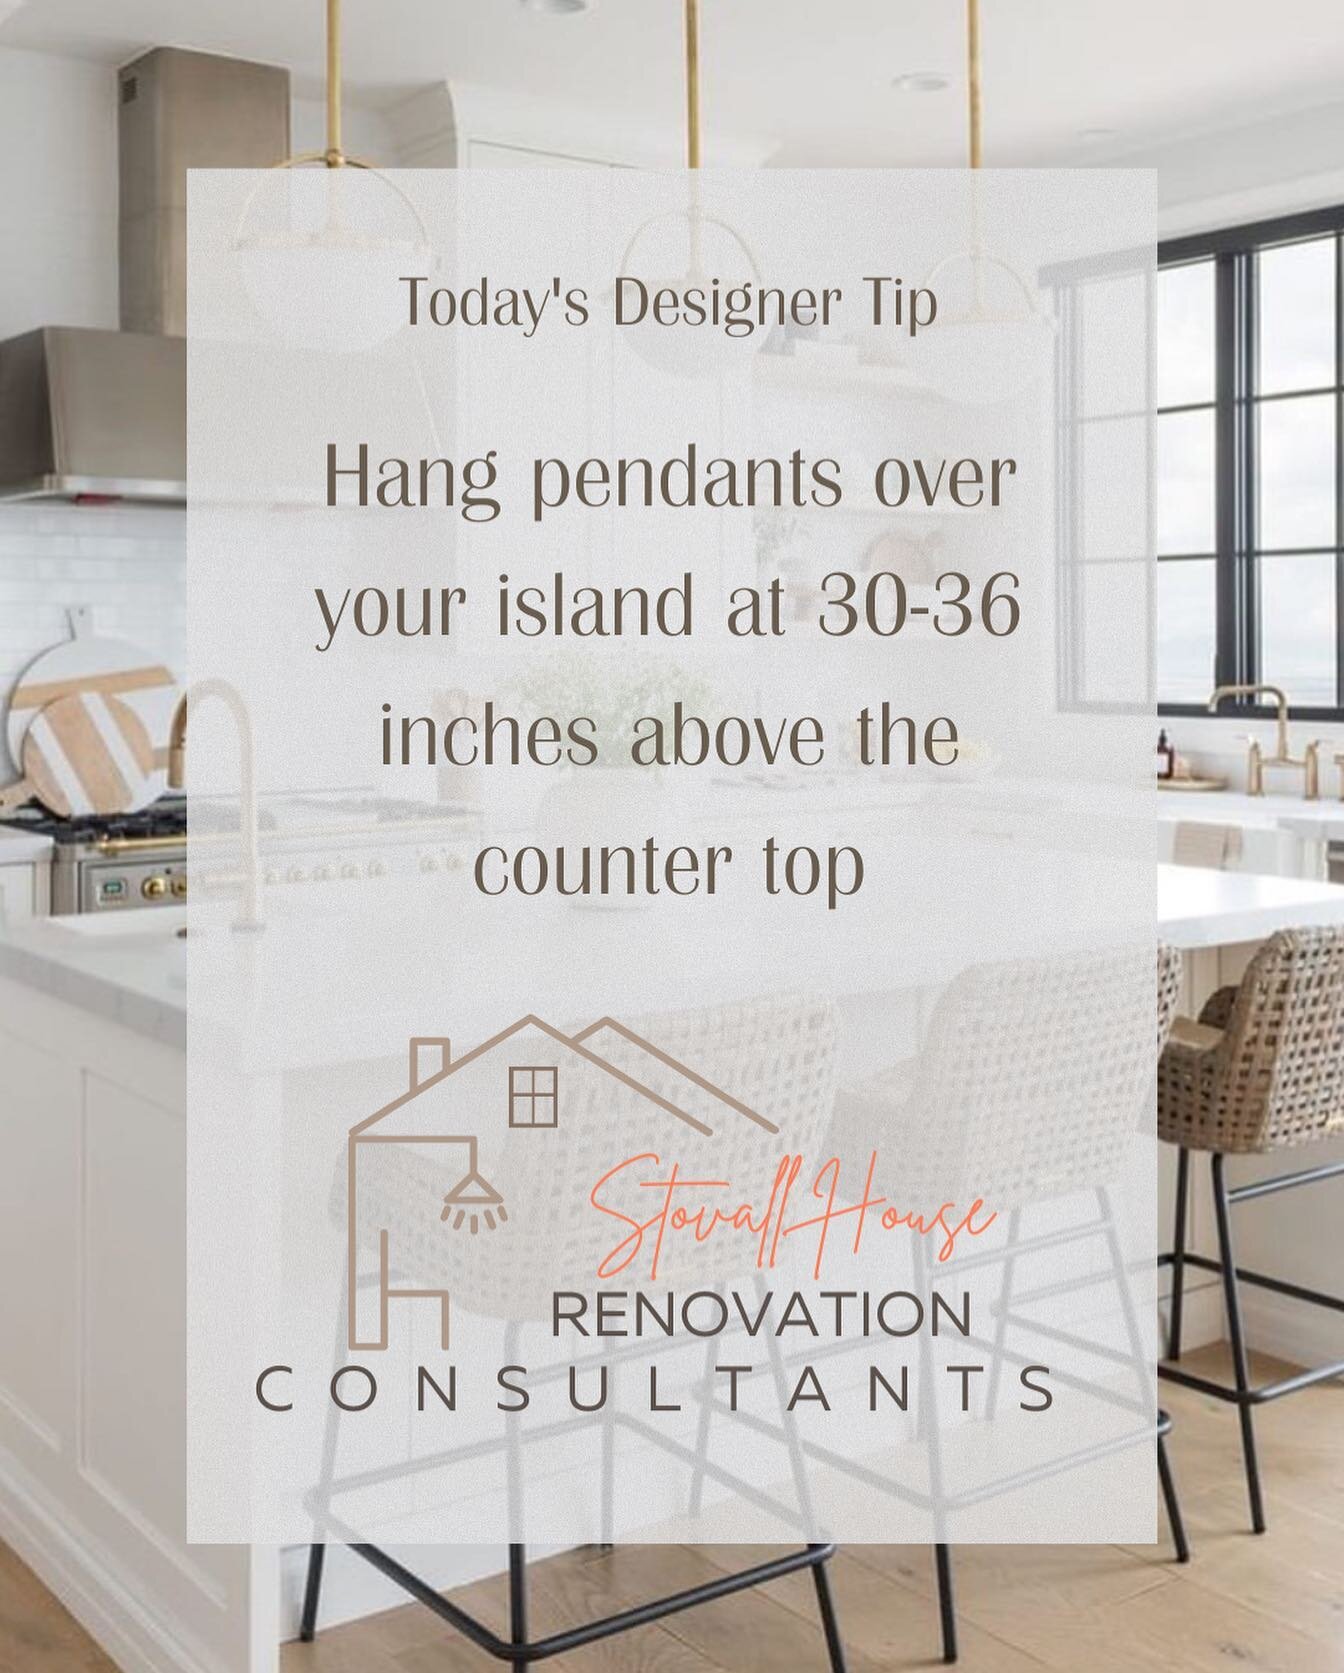 Hanging pendants over an island is a great way to add both style and task lighting to your kitchen. When selecting pendants, consider the size and height of your island, as well as the style and finish of your kitchen. It's important to hang the pend